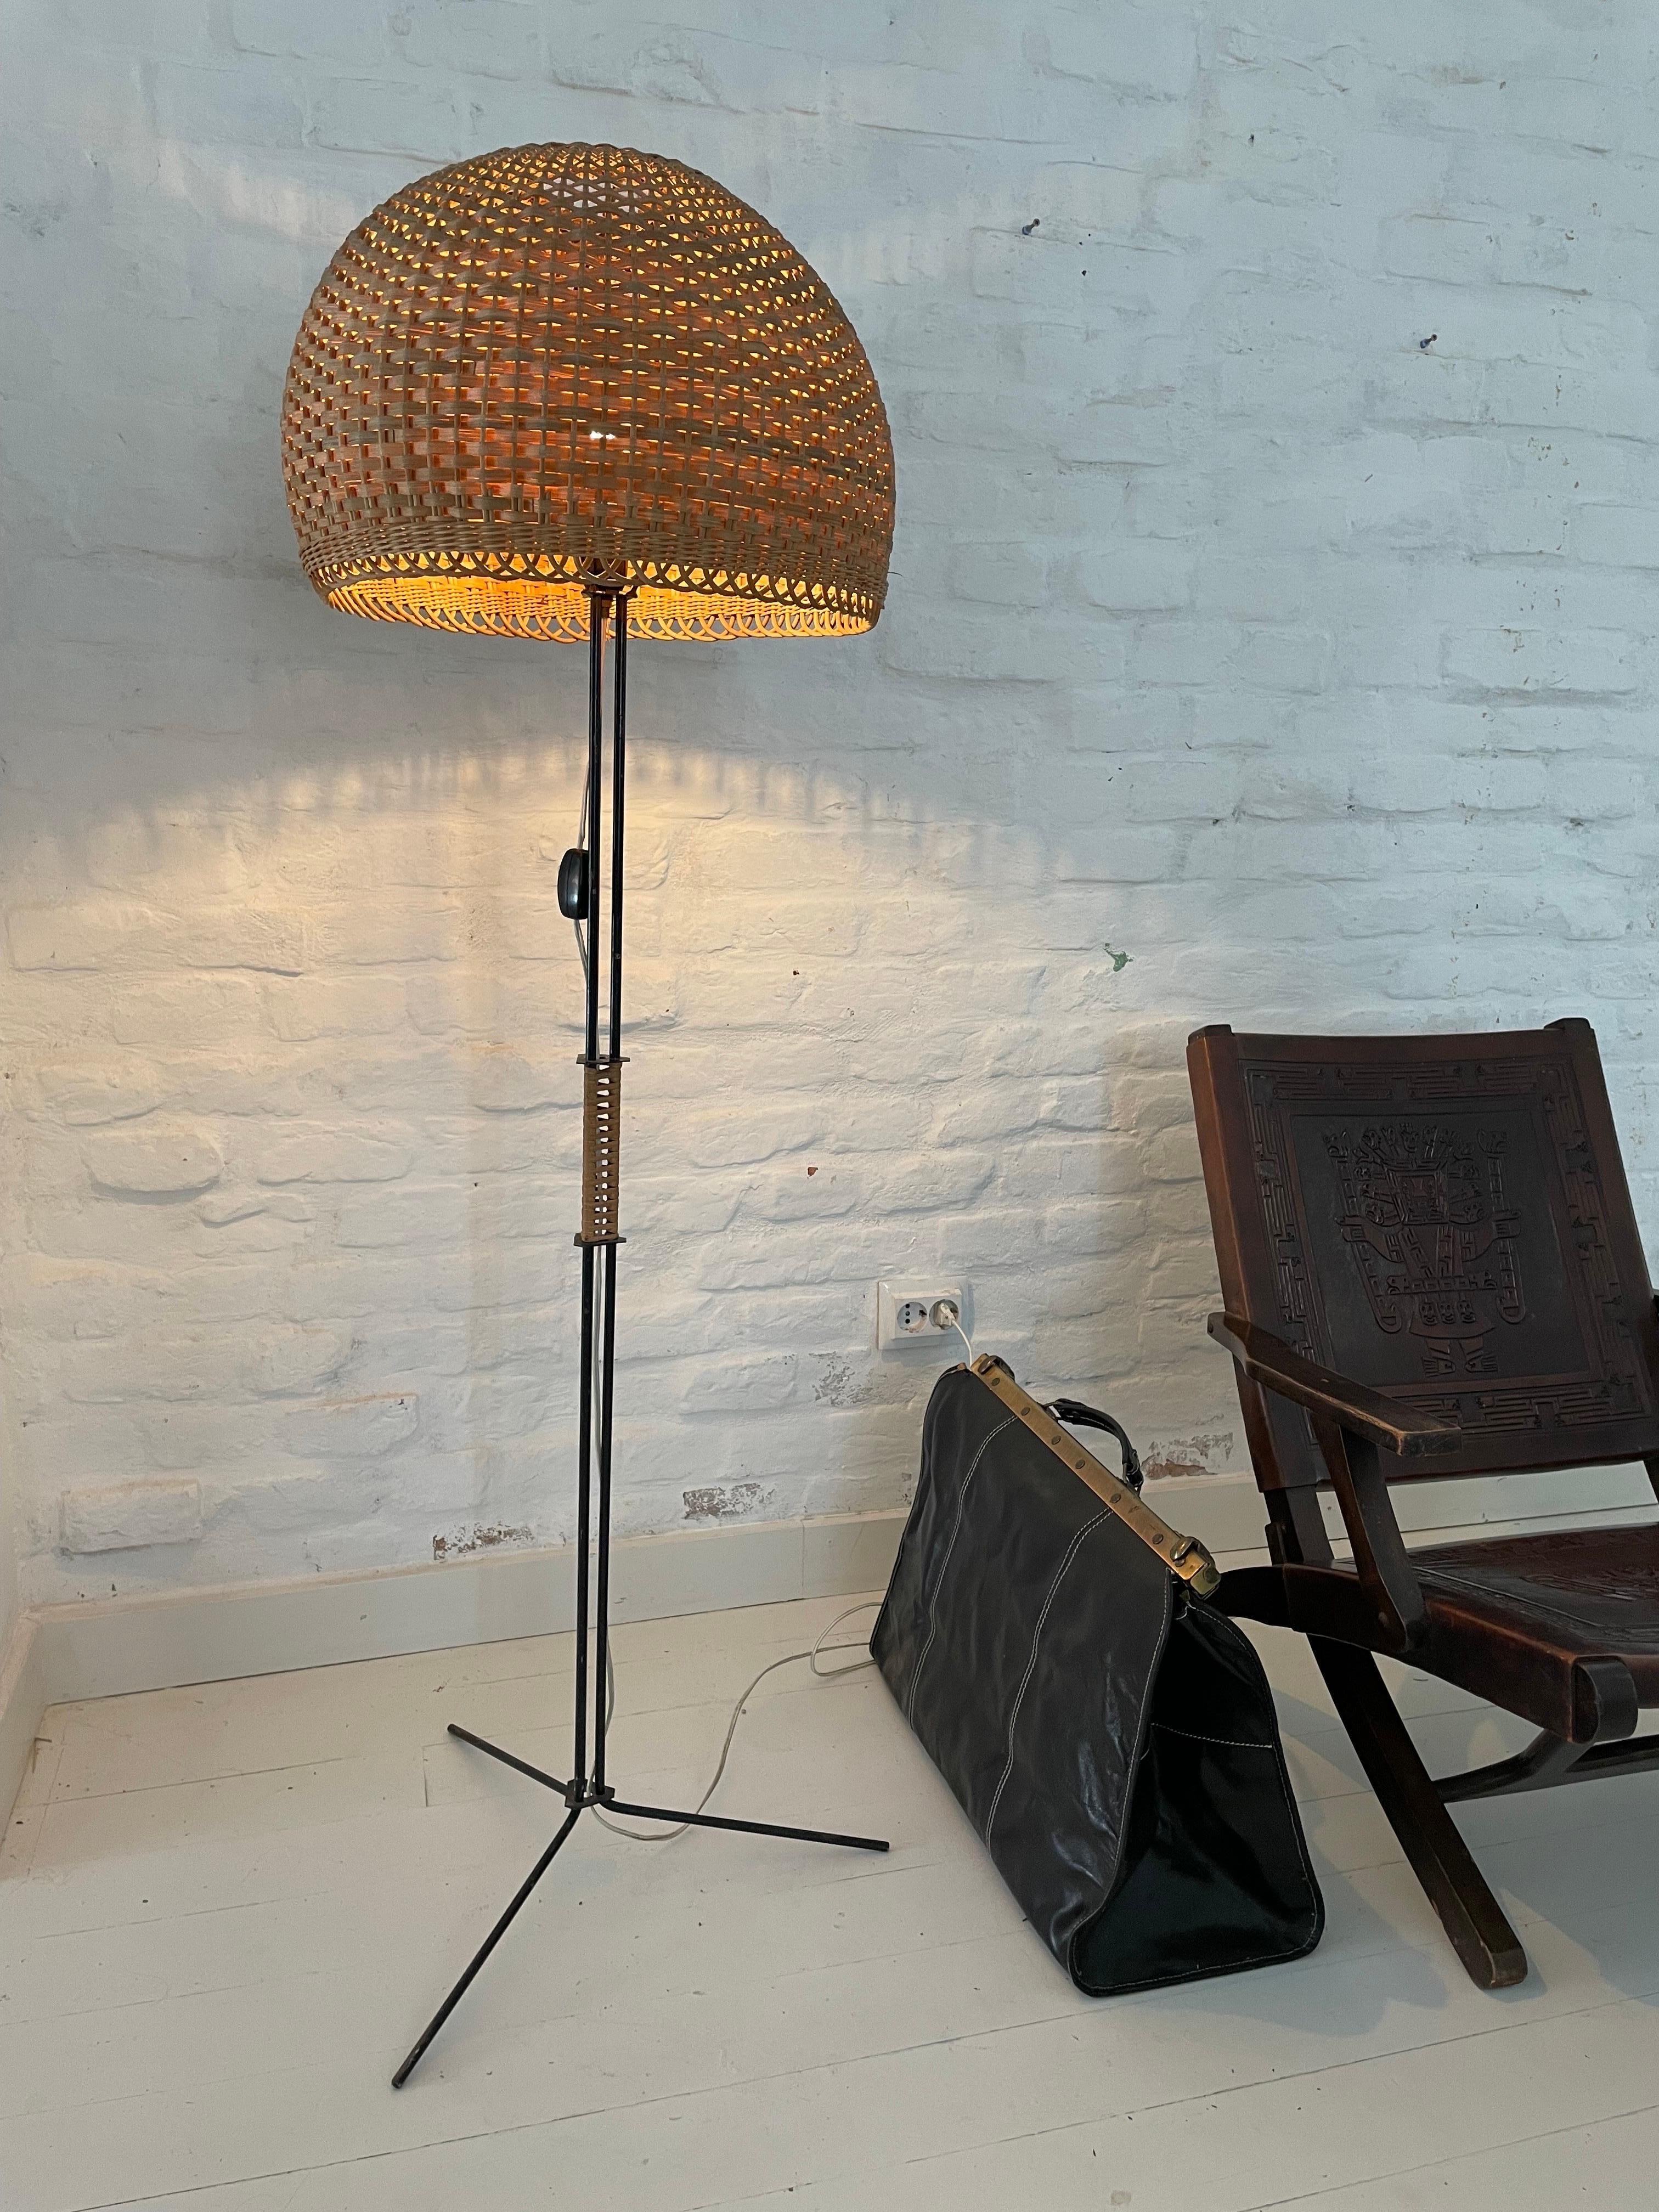 Enameled Unique  Modernist Iron and Wicker Floor Lamp, Hungary, 1950s For Sale